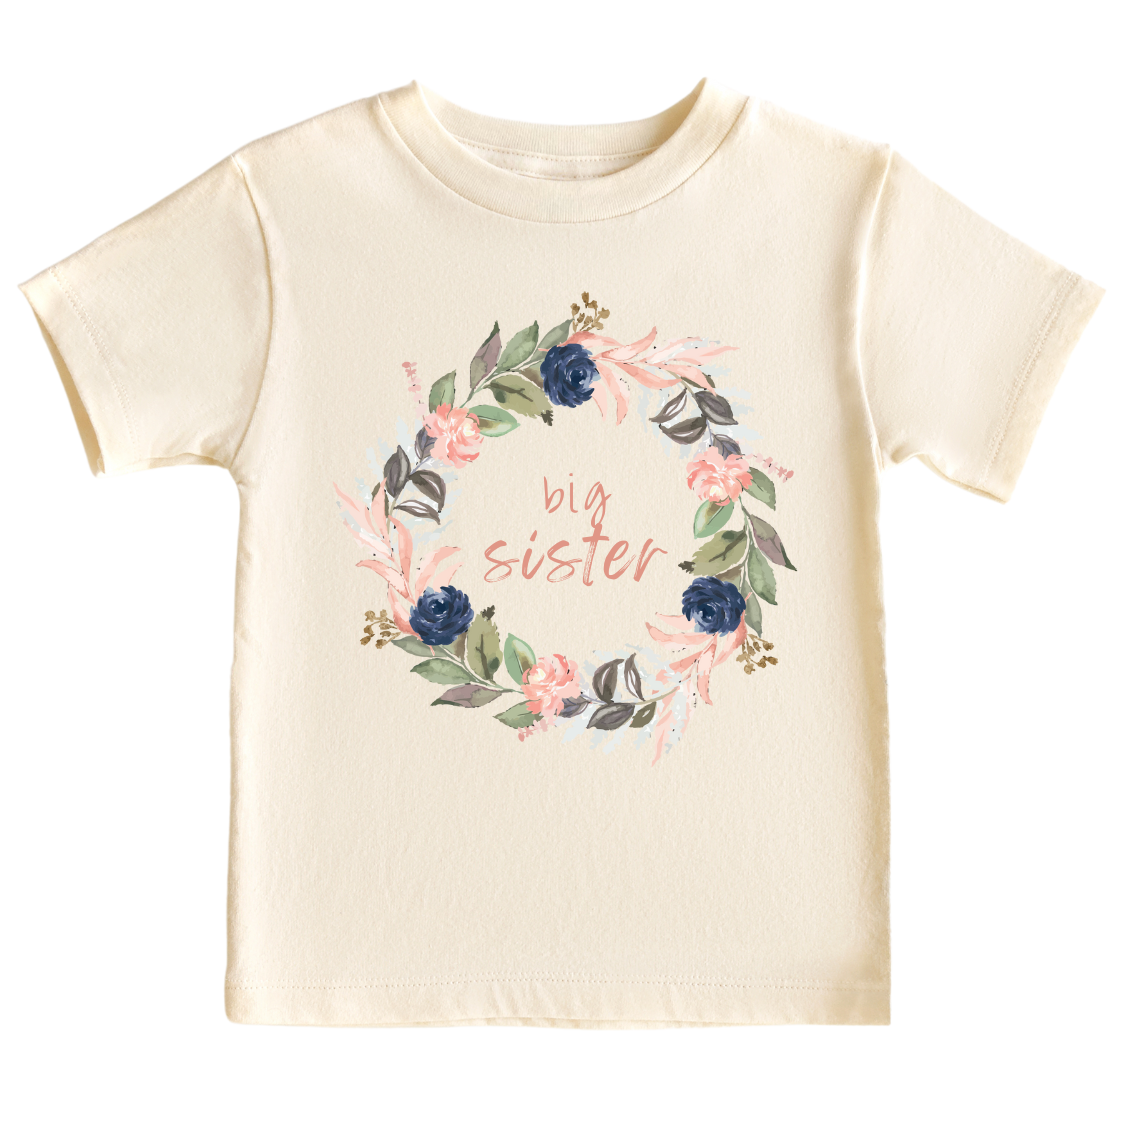 A kid's t-shirt with a cute printed graphic of a floral wreath and the text 'Big Sister.' This adorable t-shirt celebrates the special role of being a big sister. Made with high-quality materials, it offers comfort and durability, making it a perfect addition to any child's wardrobe.